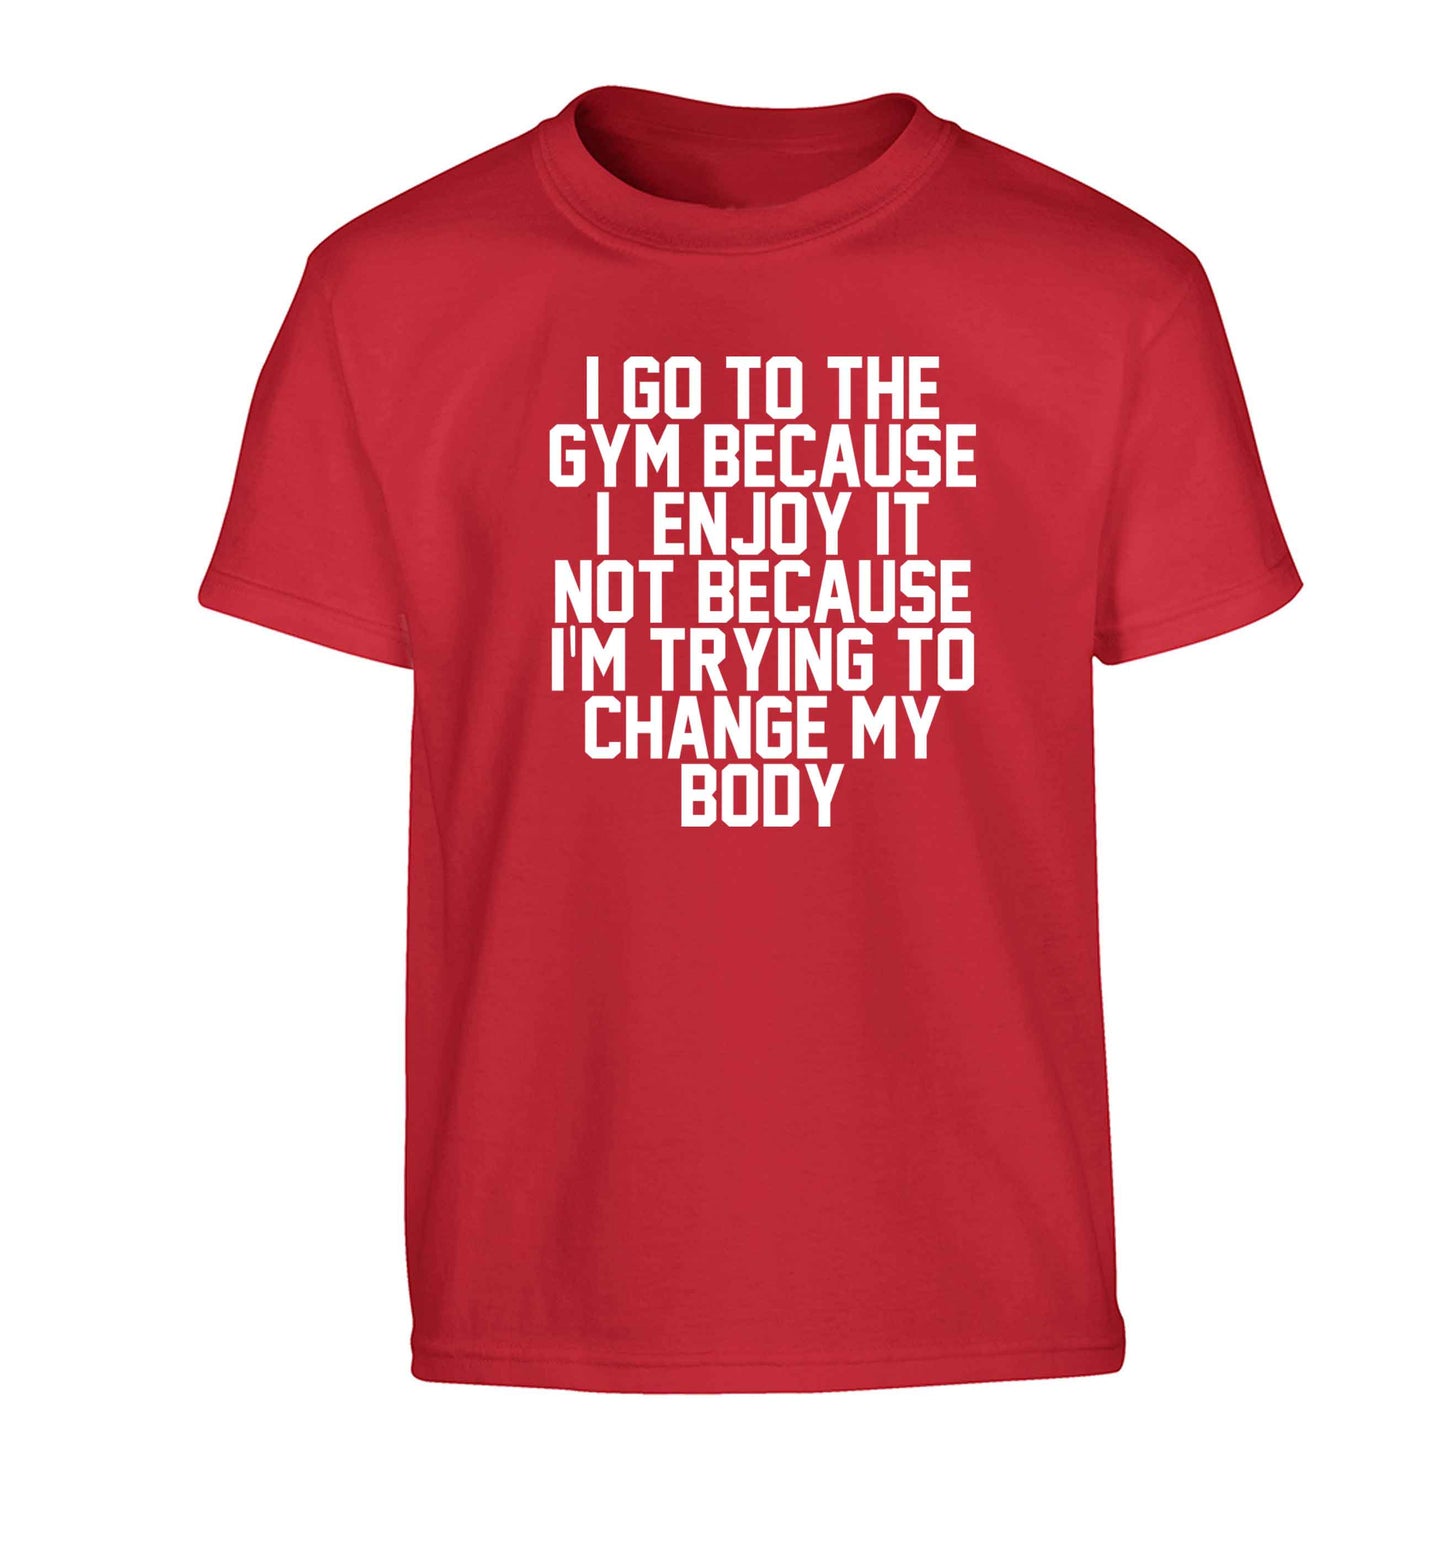 I go to the gym because I enjoy it not because I'm trying to change my body Children's red Tshirt 12-13 Years